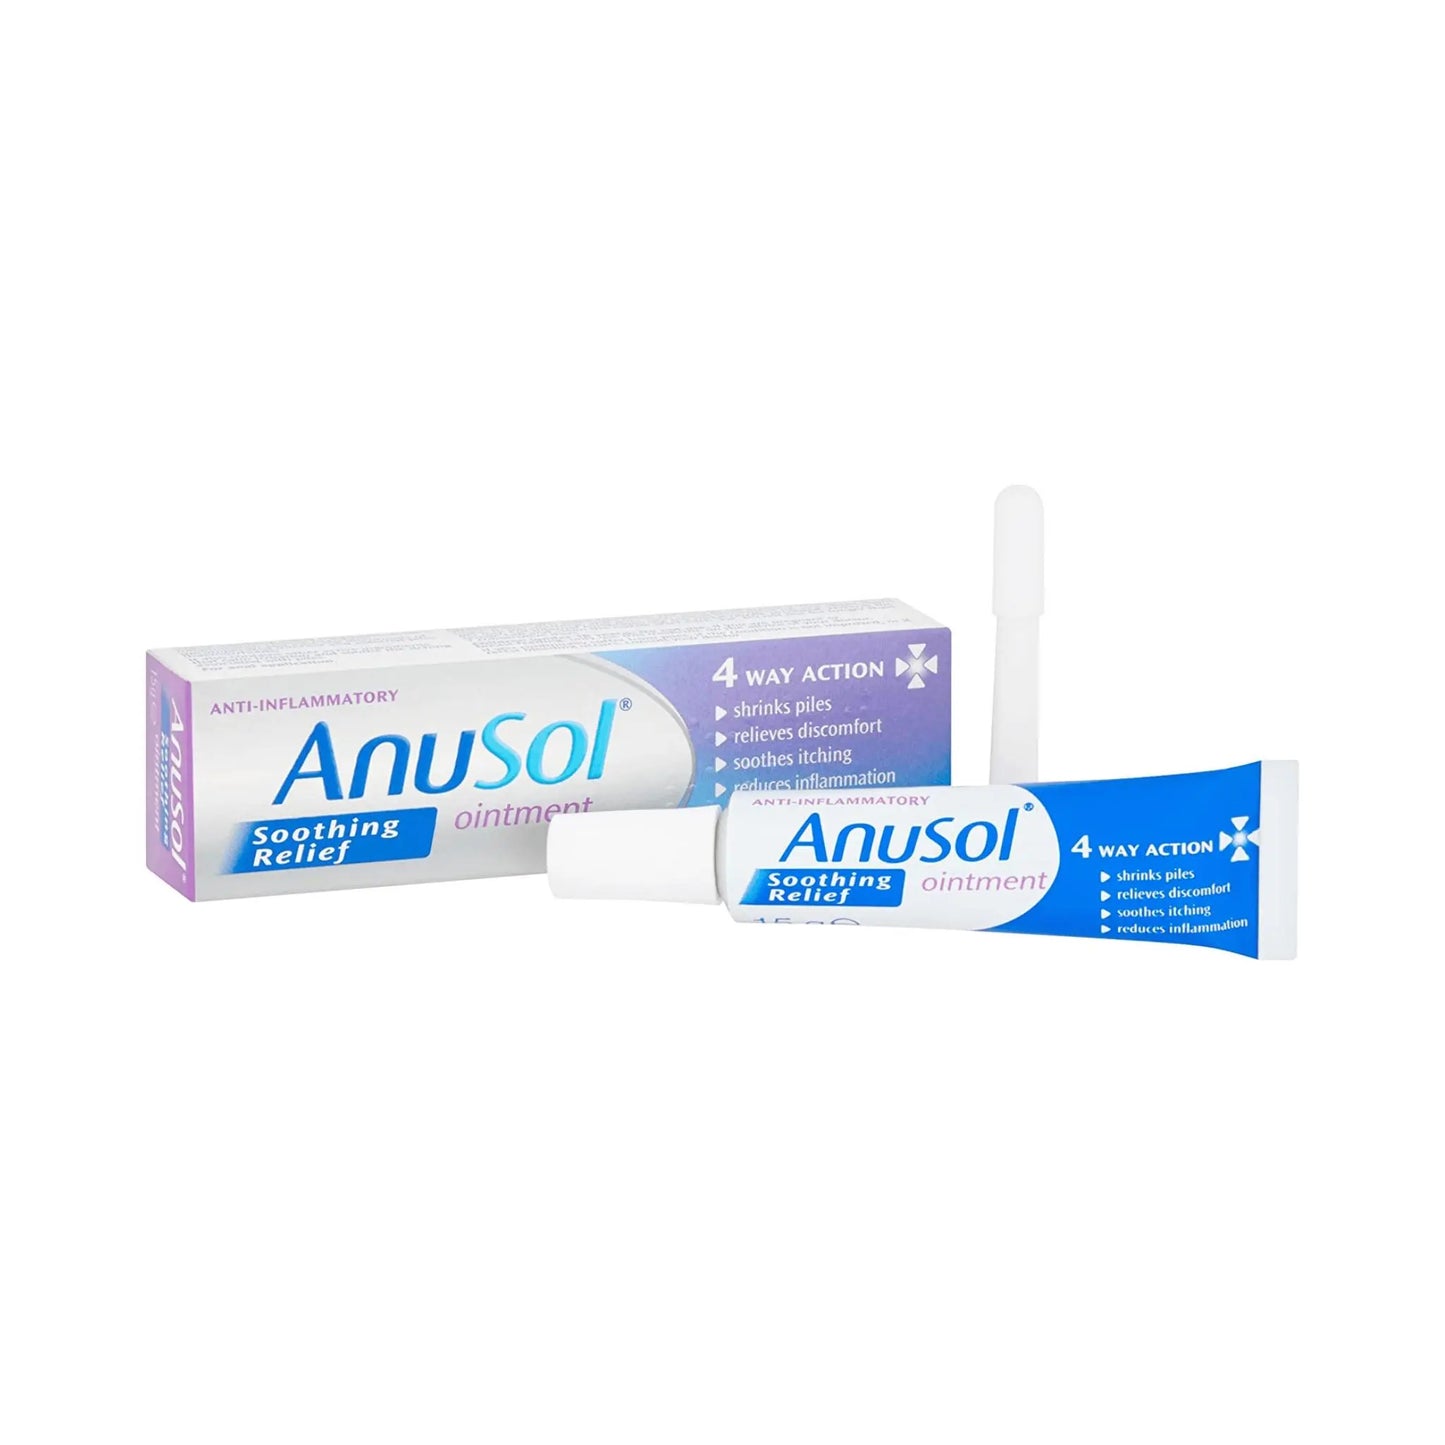 Anusol Piles and Haemorrhoid Soothing Relief Ointment 15mg